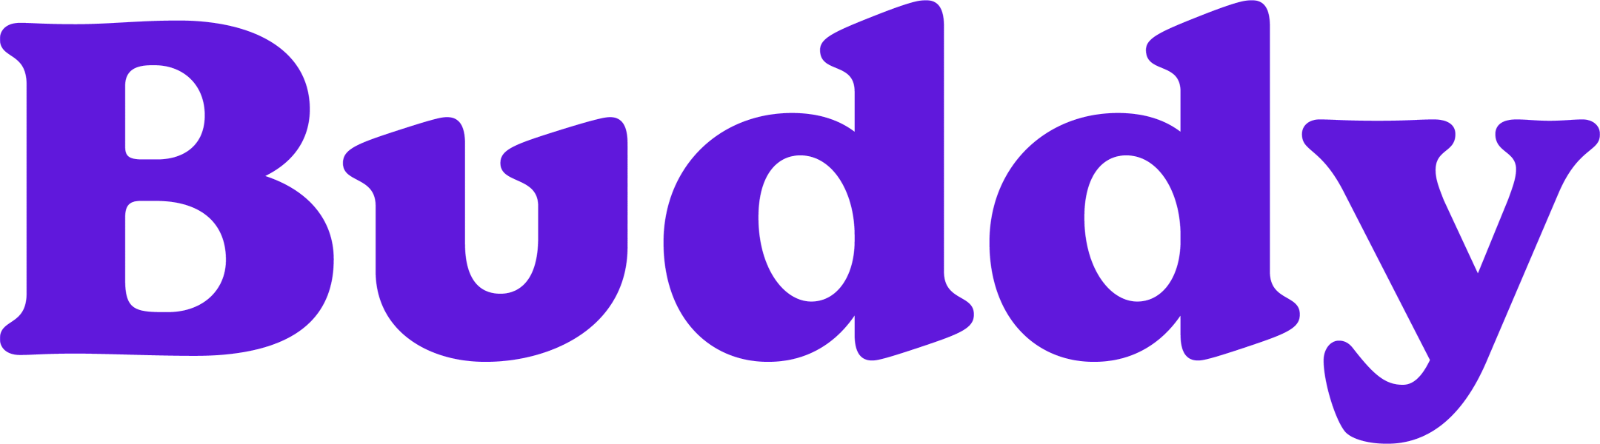 The new logo for Buddy Training after Damteq rebranded them from their previous 'Fizz Training Academy' branding.